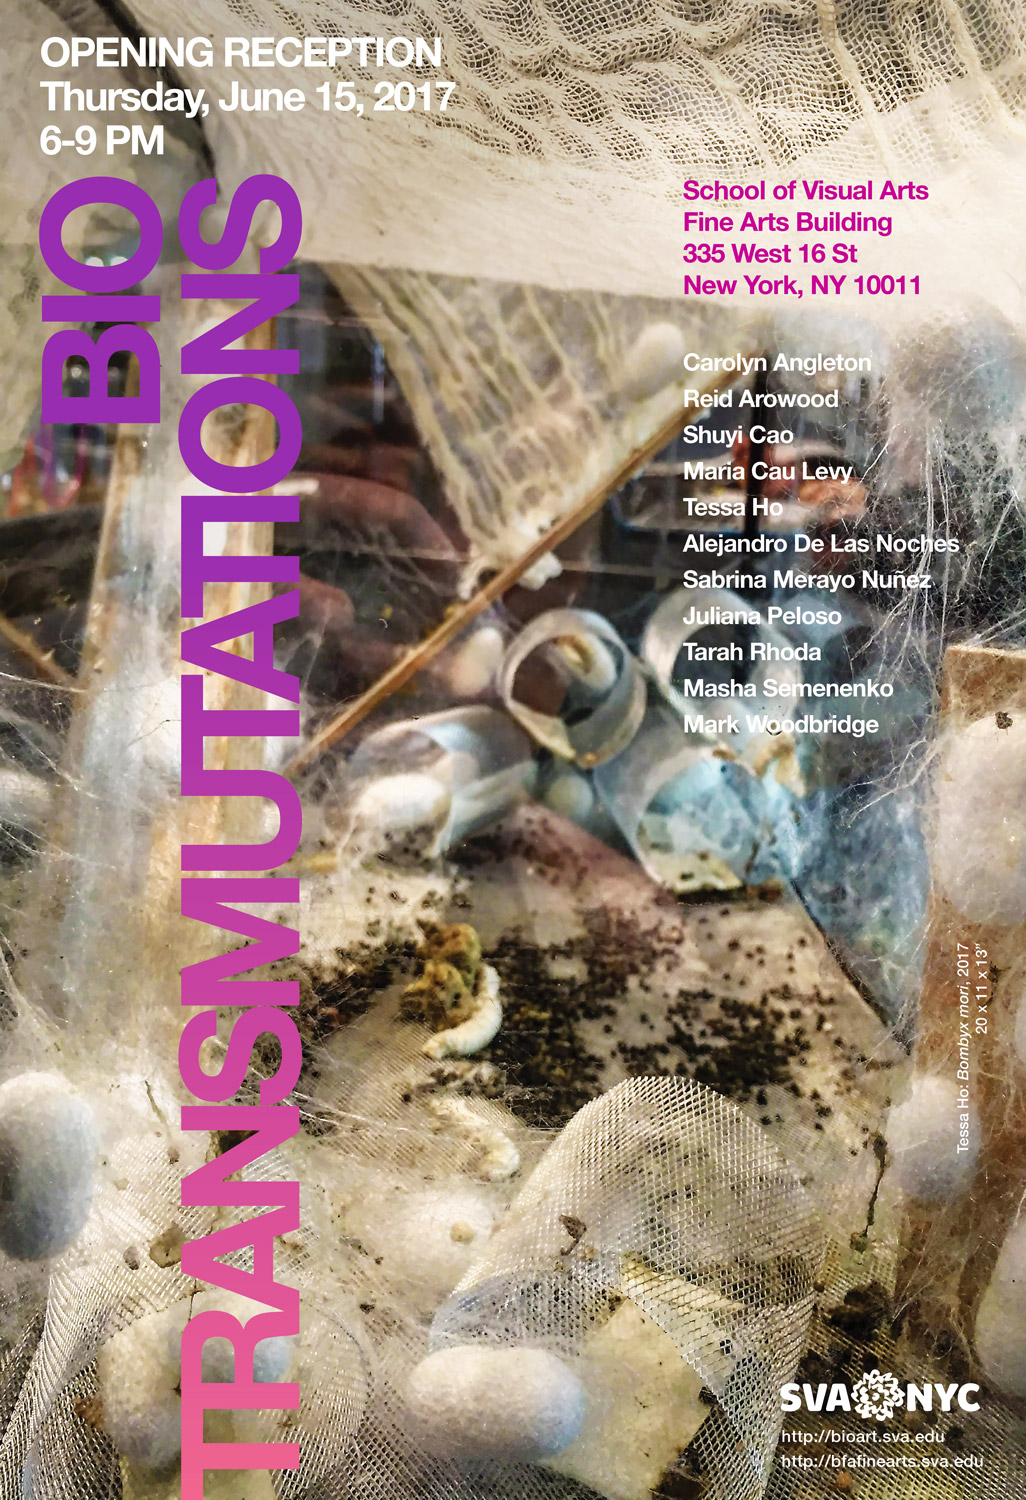 Poster with "Bio Transmutations" on the left side in magenta/purple gradient letters, above that in white text shows the time of exhibition, and on the right in magenta text is the location information with the exhibition artists in white text below it, all on a background depicting various beige textures, larvae, and cacoons